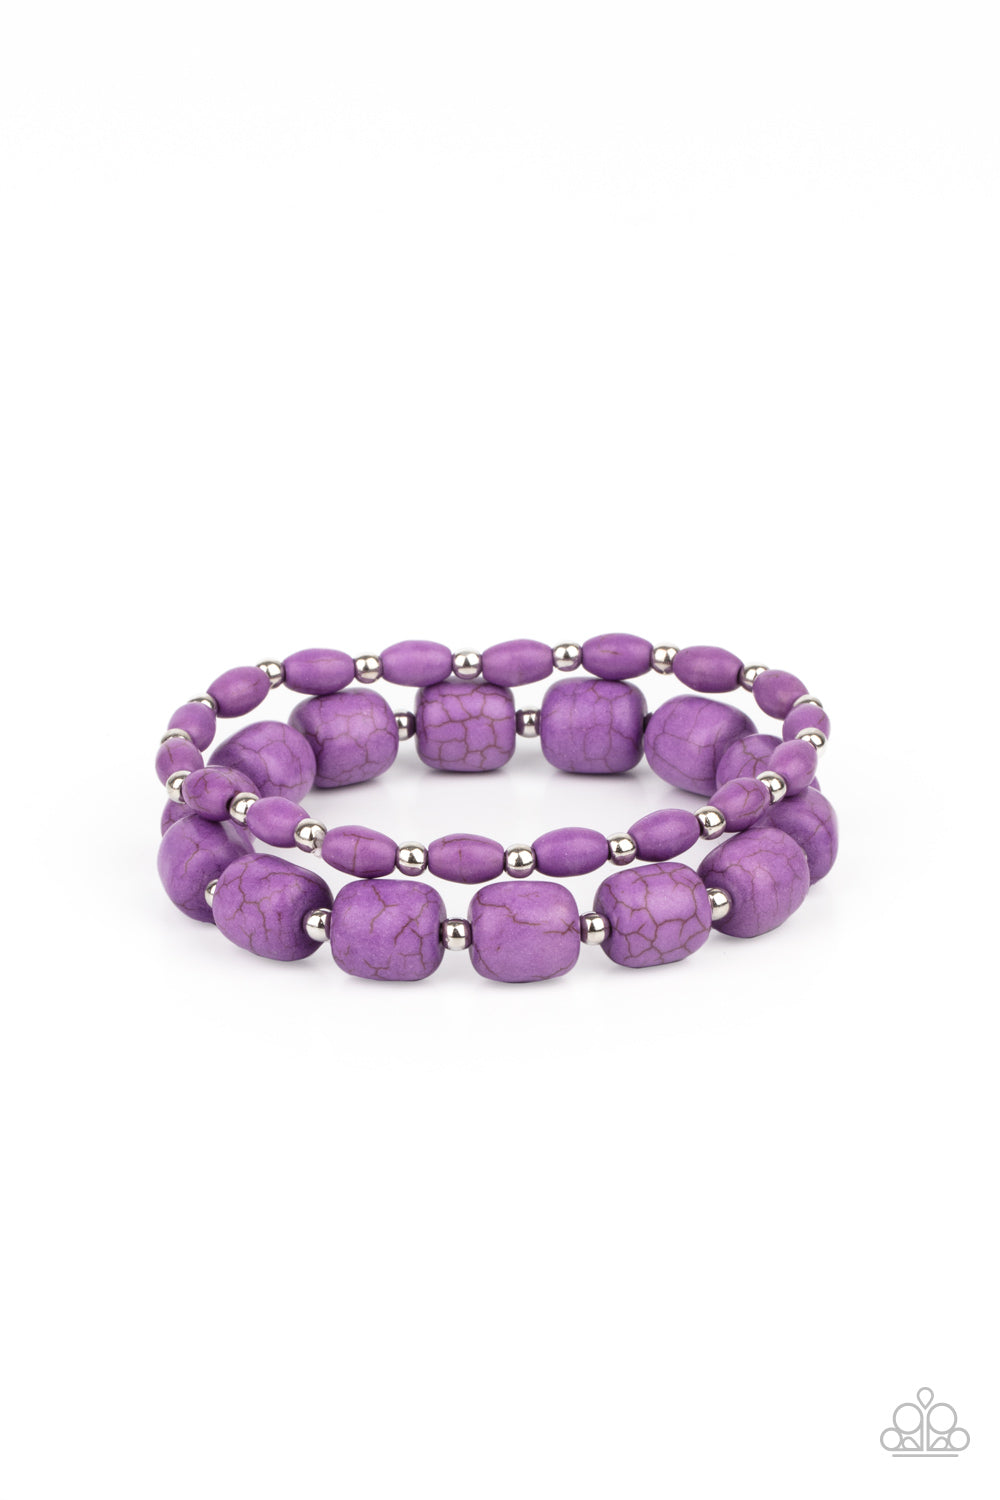 Colorfully Country - Purple - Paparazzi Dainty silver beads and mismatched purple stone beads are threaded along stretchy bands around the wrist, creating vivacious layers.